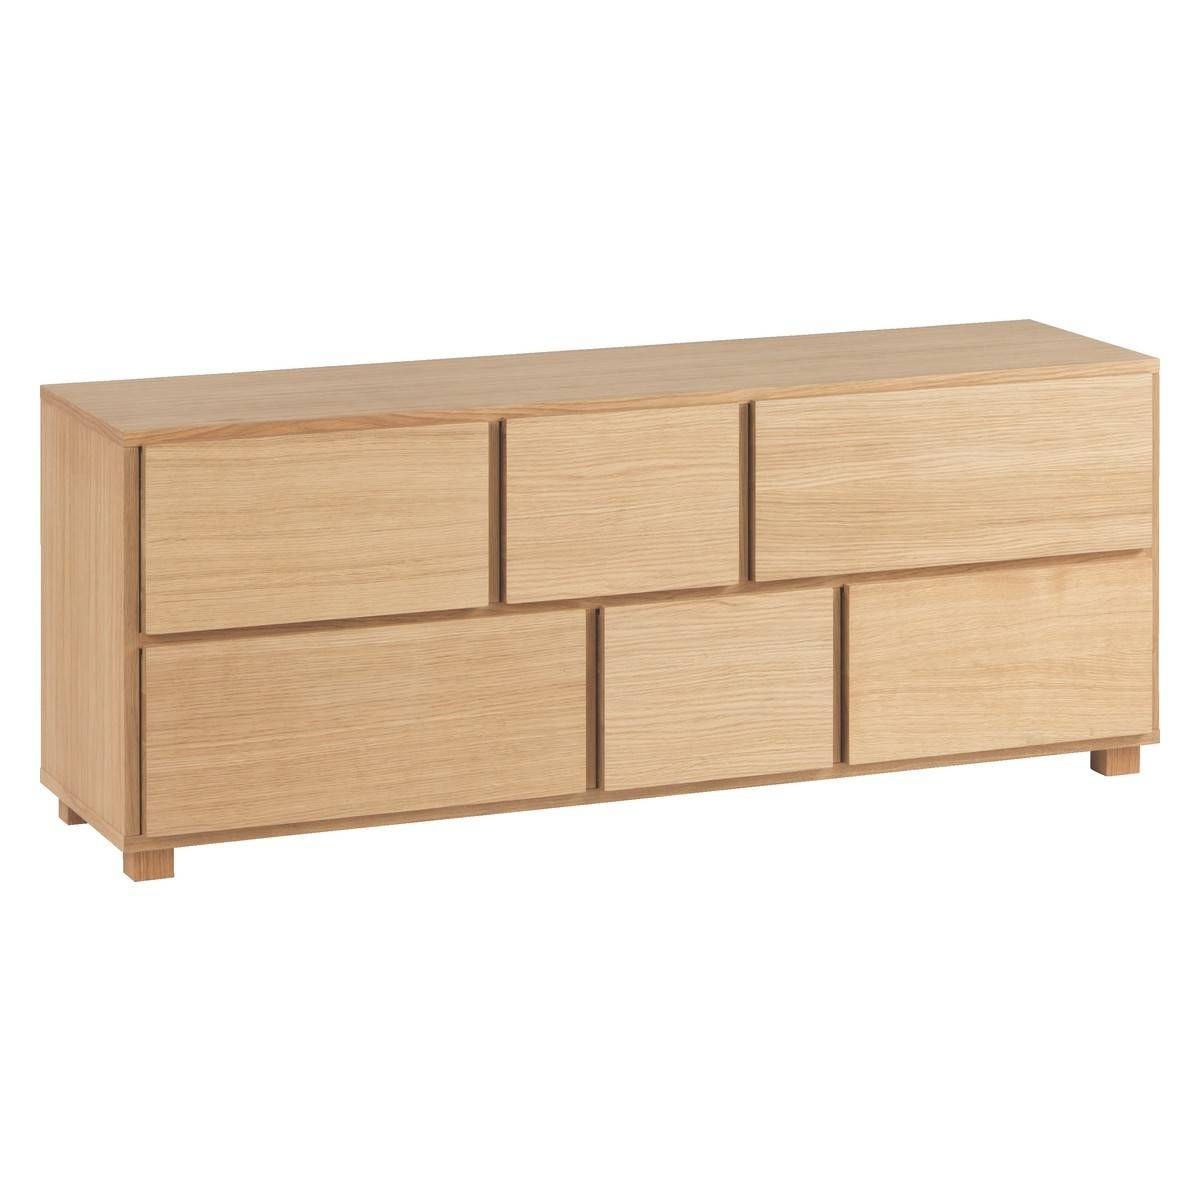 Hana Ii Oiled Oak 6 Drawer Low Wide Chest | Buy Now At Habitat Uk Throughout Most Recently Released Low Wooden Sideboards (View 3 of 15)